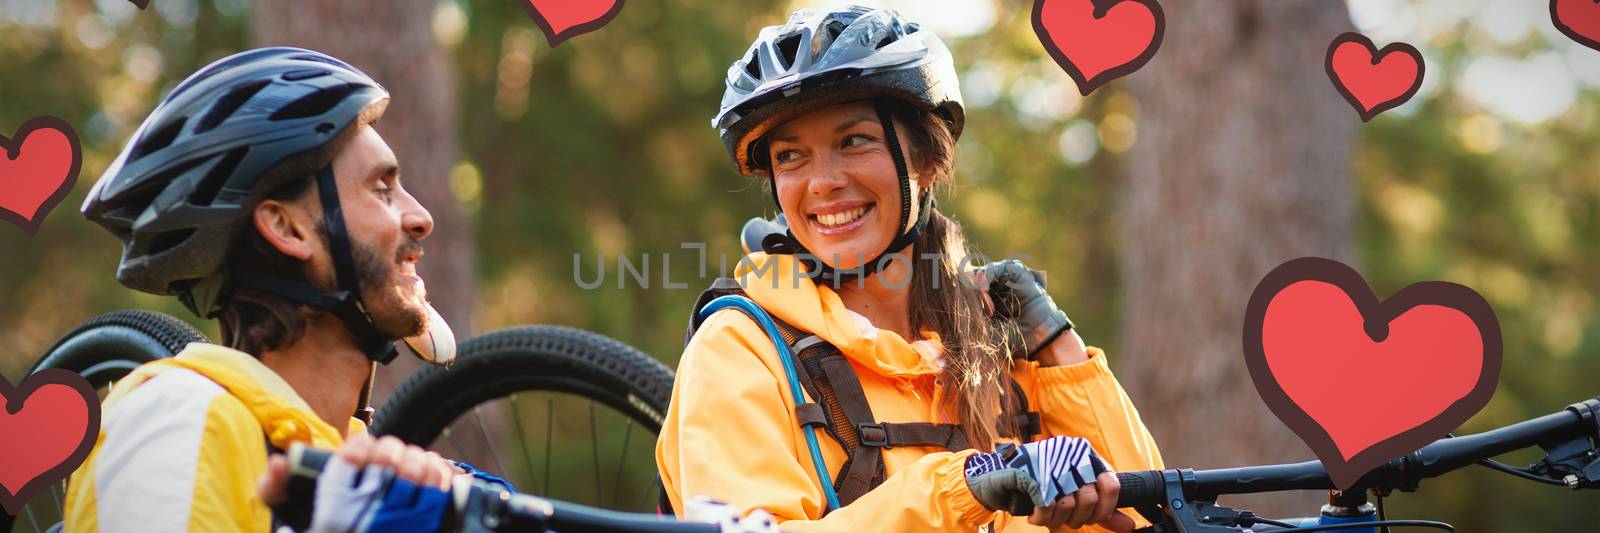 Red Hearts against biker couple carrying mountain bike